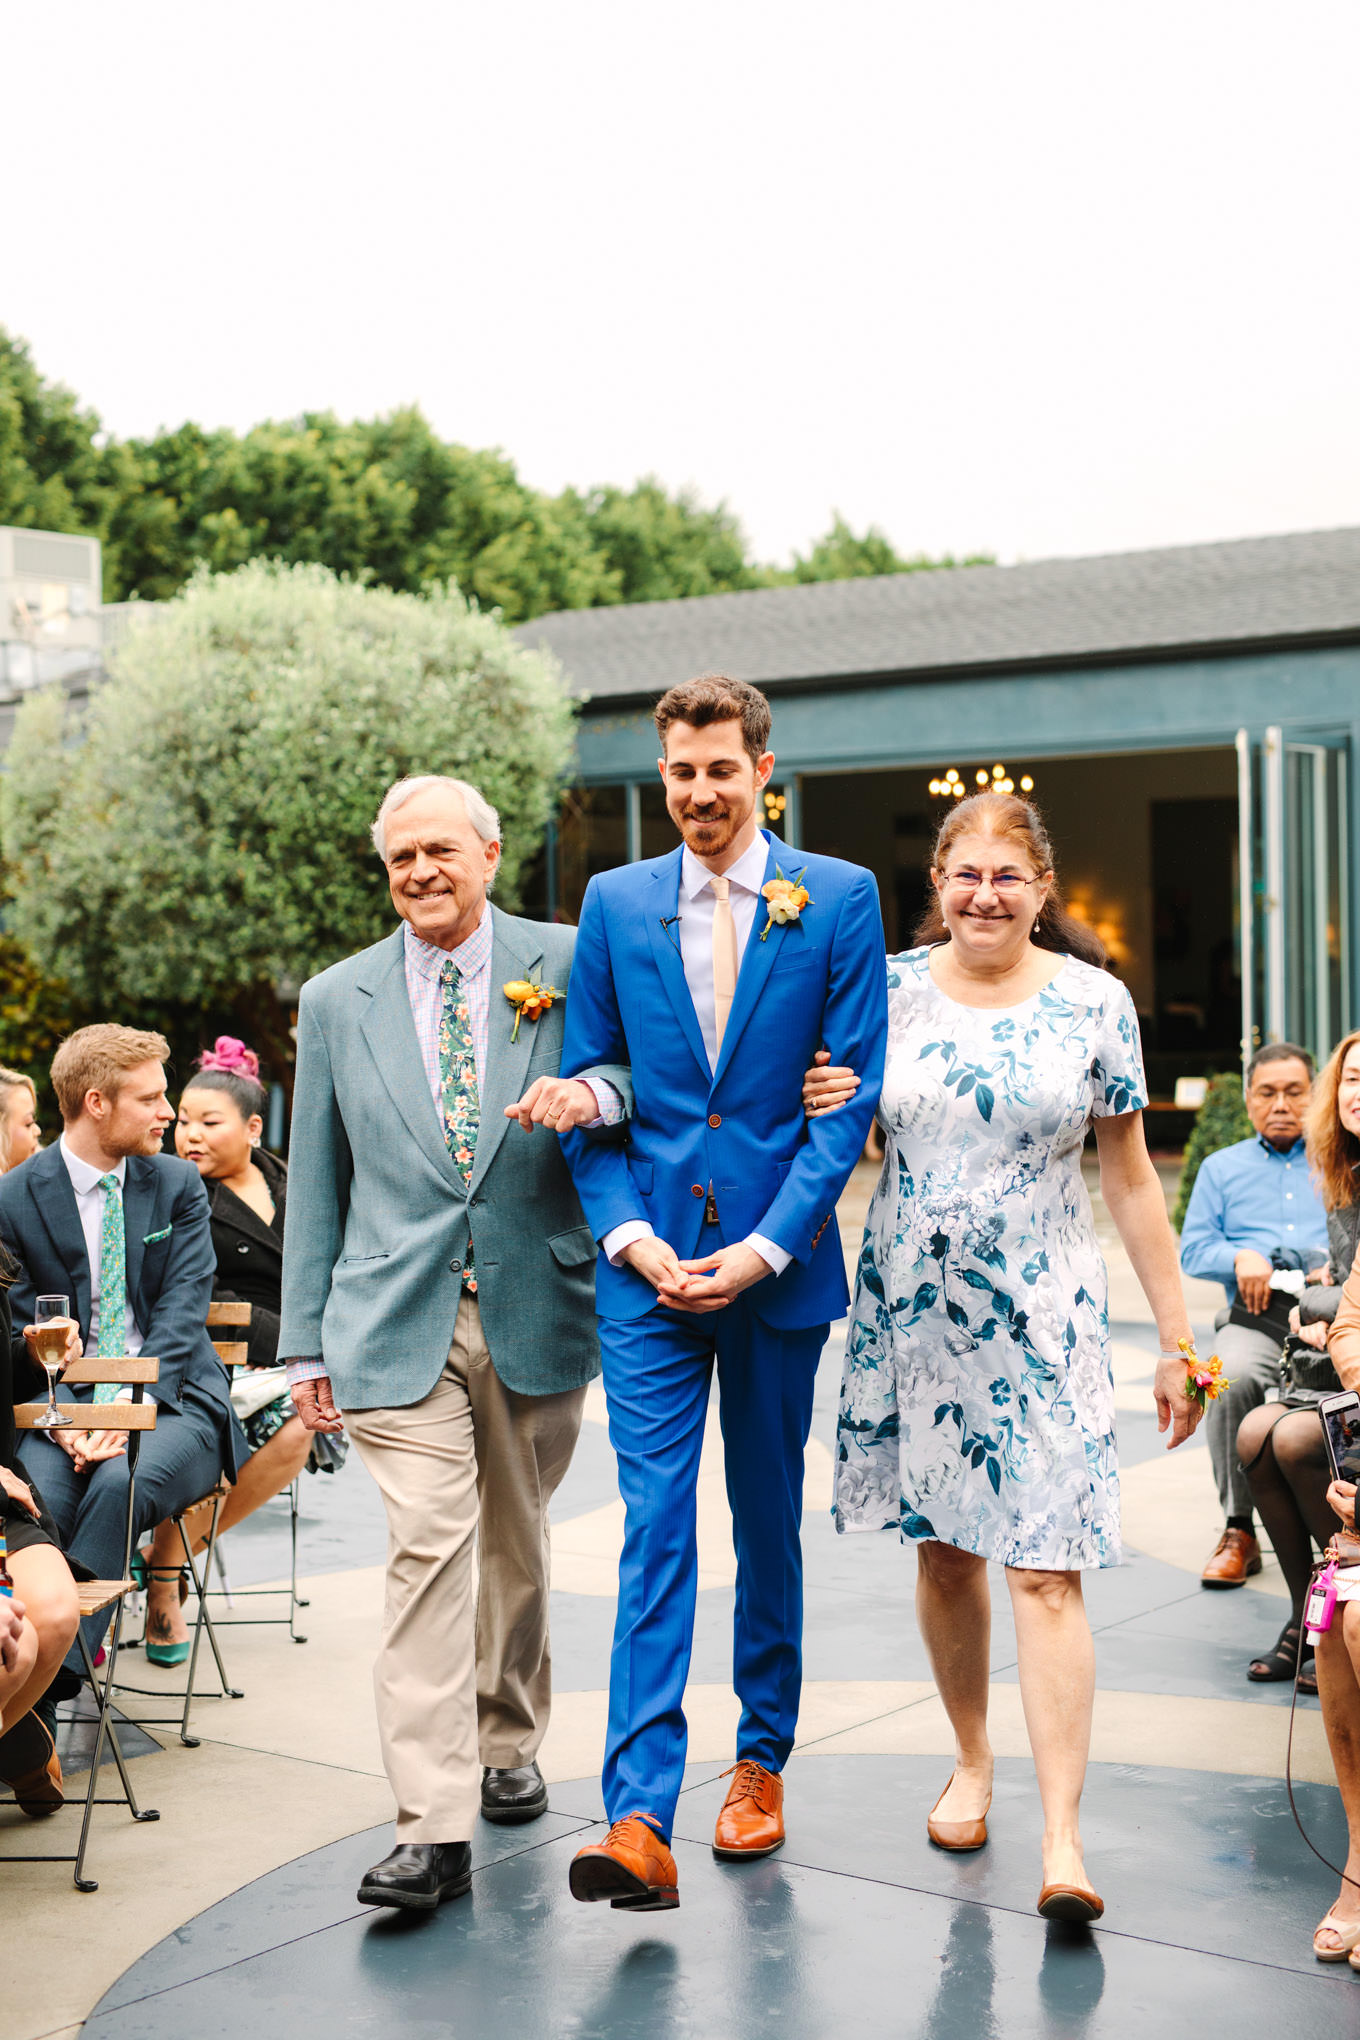 Groom entering ceremony with parents | TV inspired wedding at The Fig House Los Angeles | Published on The Knot | Fresh and colorful photography for fun-loving couples in Southern California | #losangeleswedding #TVwedding #colorfulwedding #theknot   Source: Mary Costa Photography | Los Angeles wedding photographer